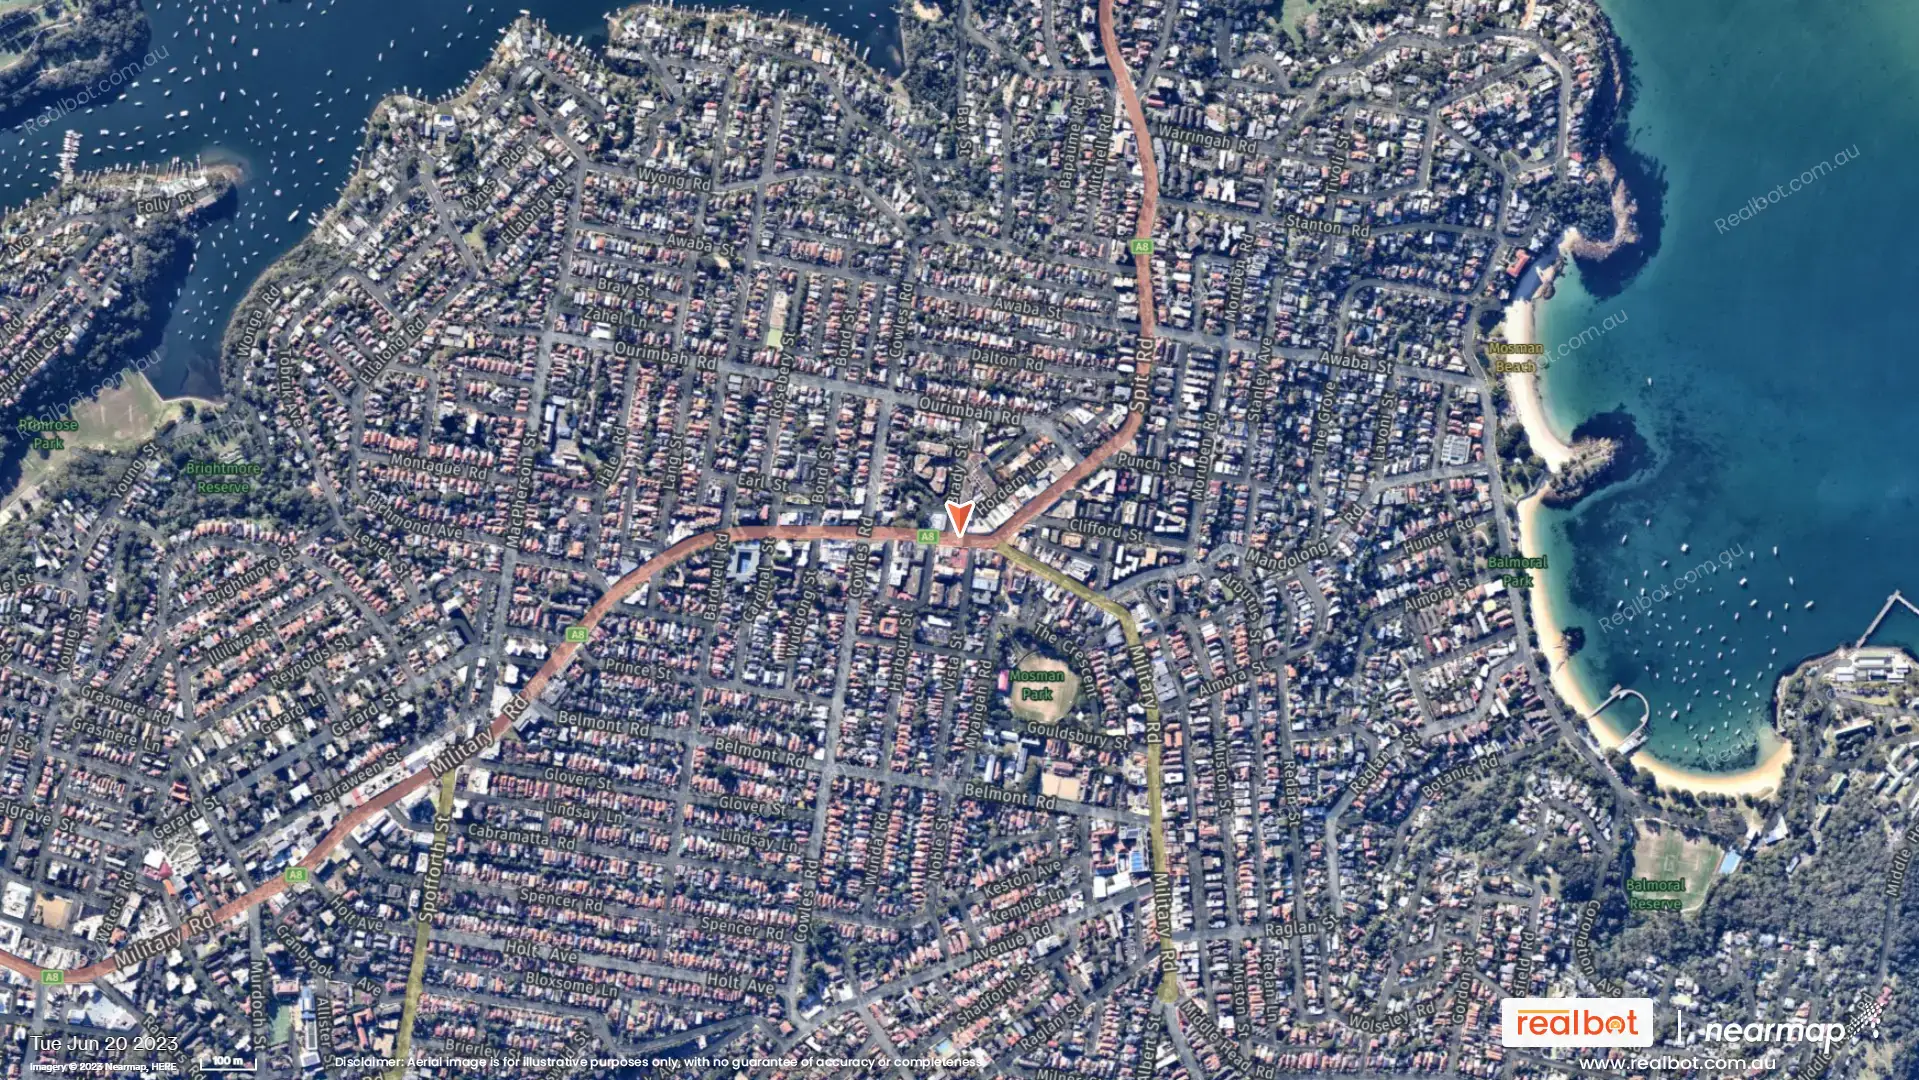 mosman-nsw-2088-Suburb-Profile-And-Aerial-Images-Real-Search